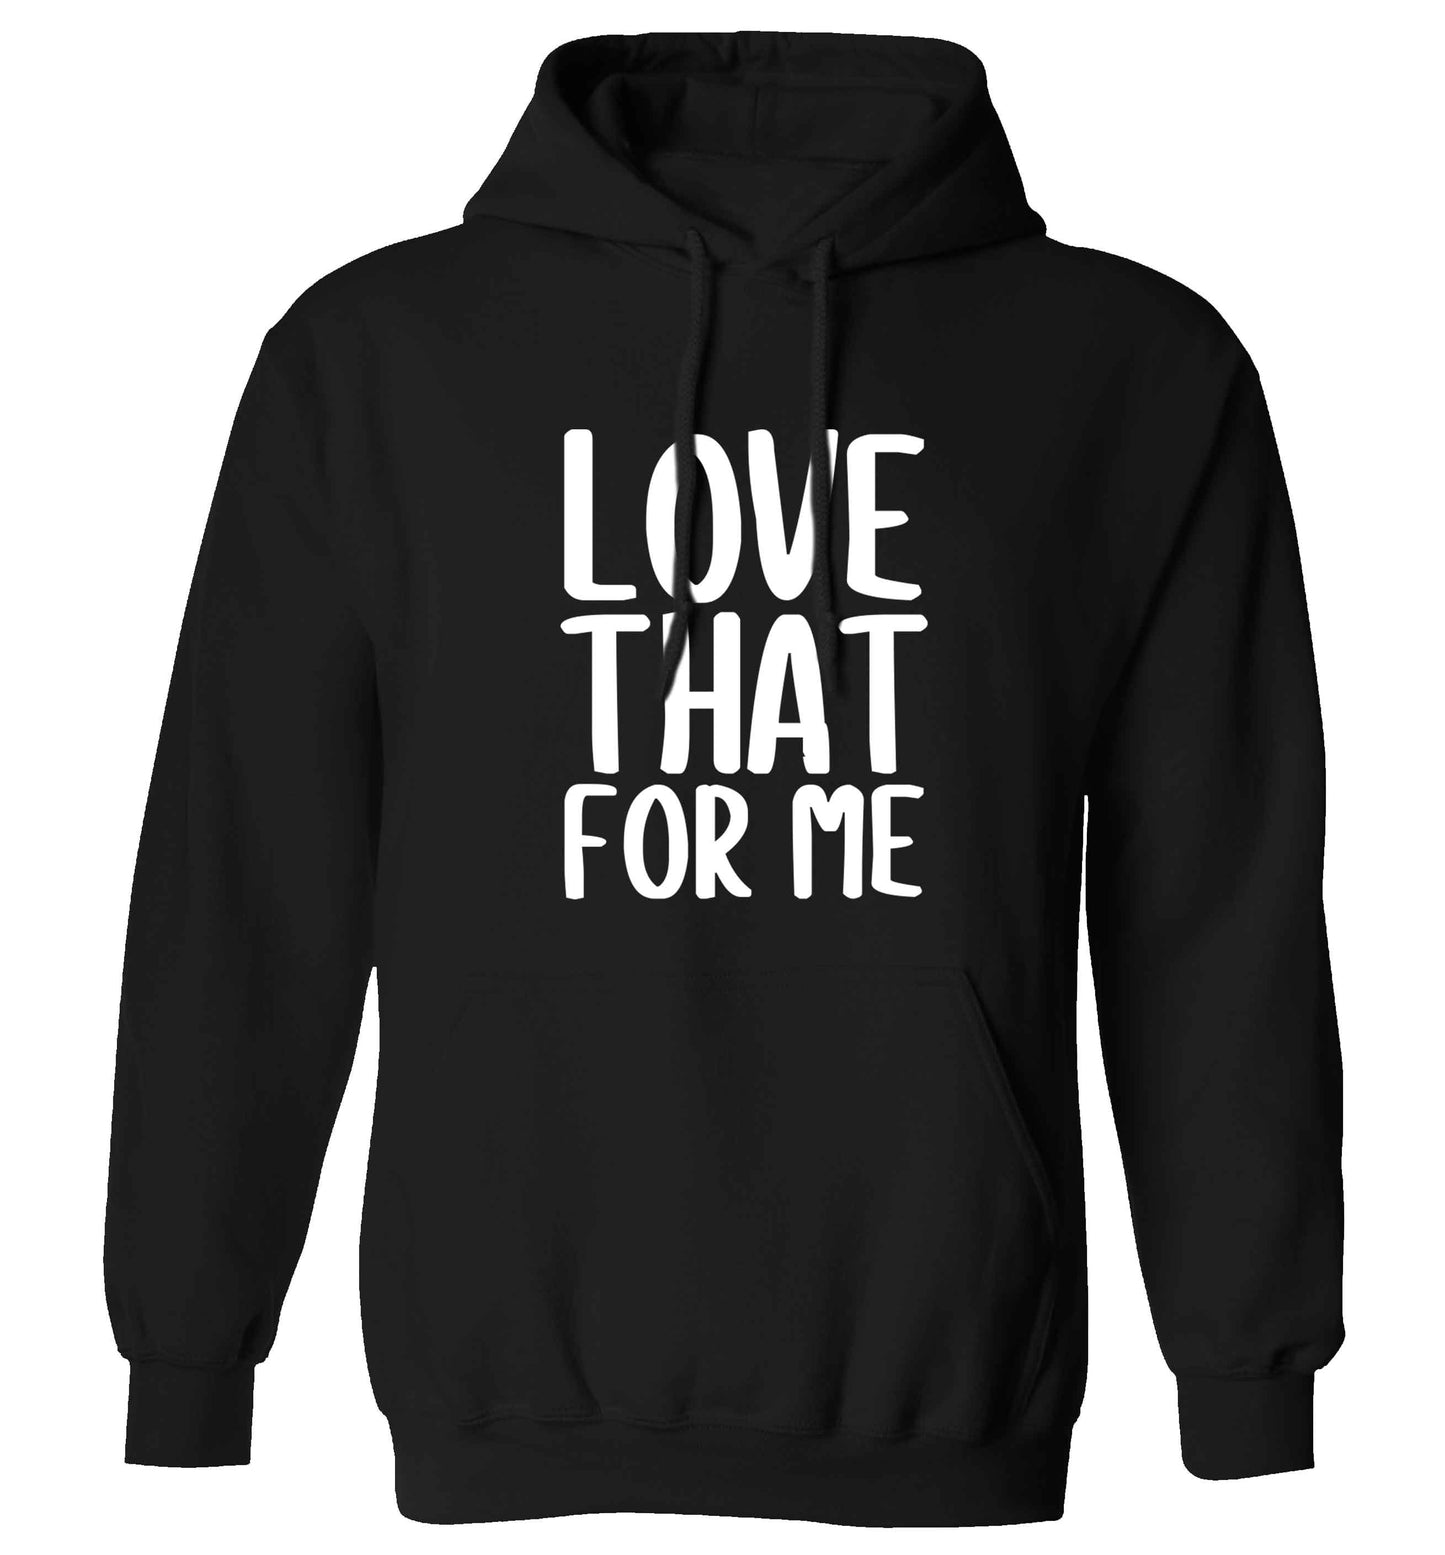 We love this for YOU! Who else loves saying this?!  adults unisex black hoodie 2XL